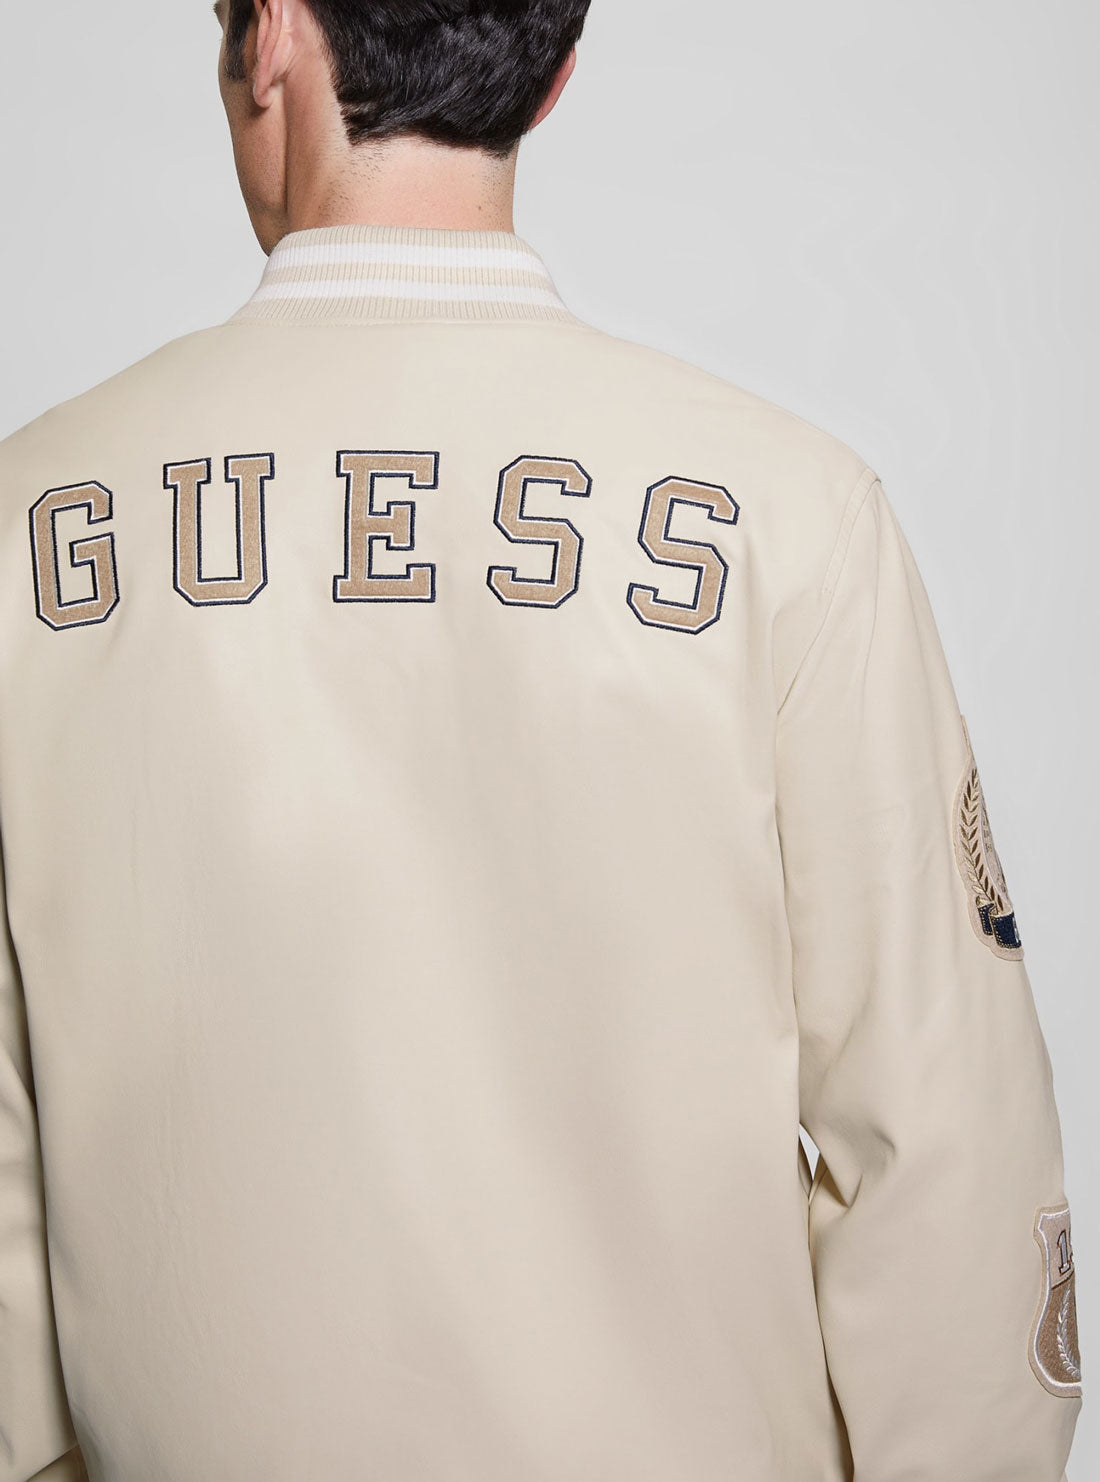 GUESS Beige Varsity Bomber Jacket detail view